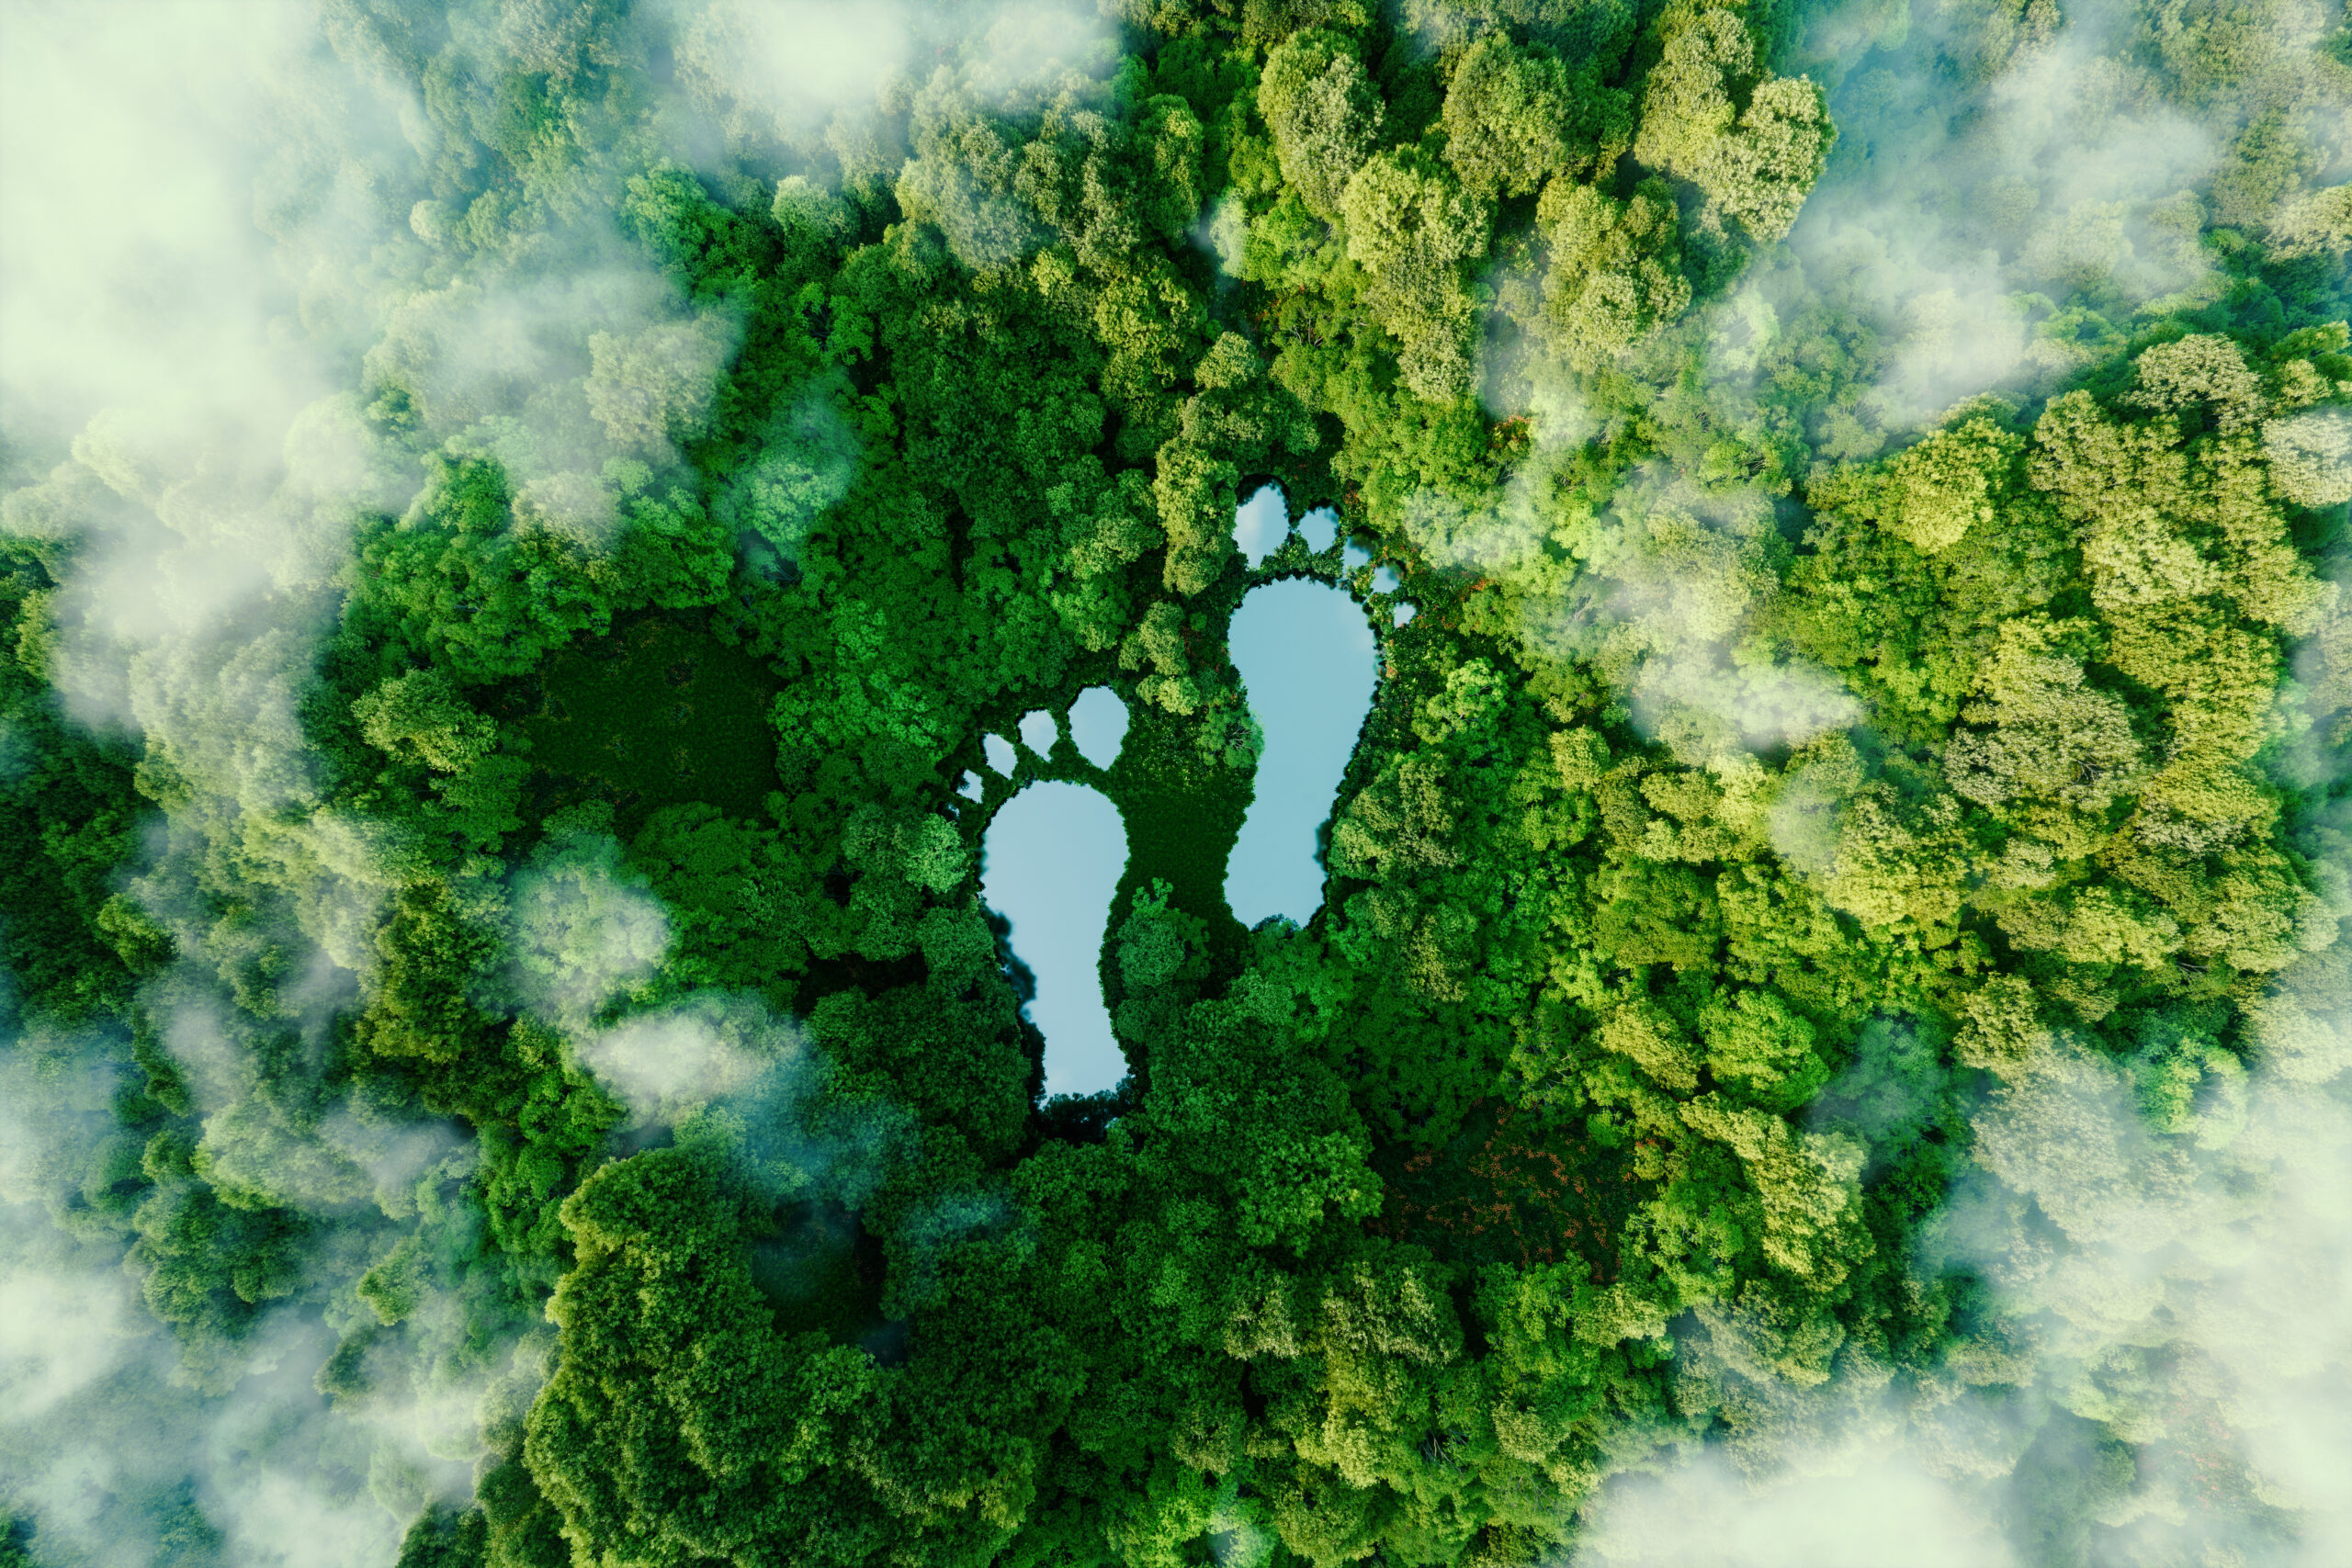 A lake in the shape of human footprints in the middle of a lush